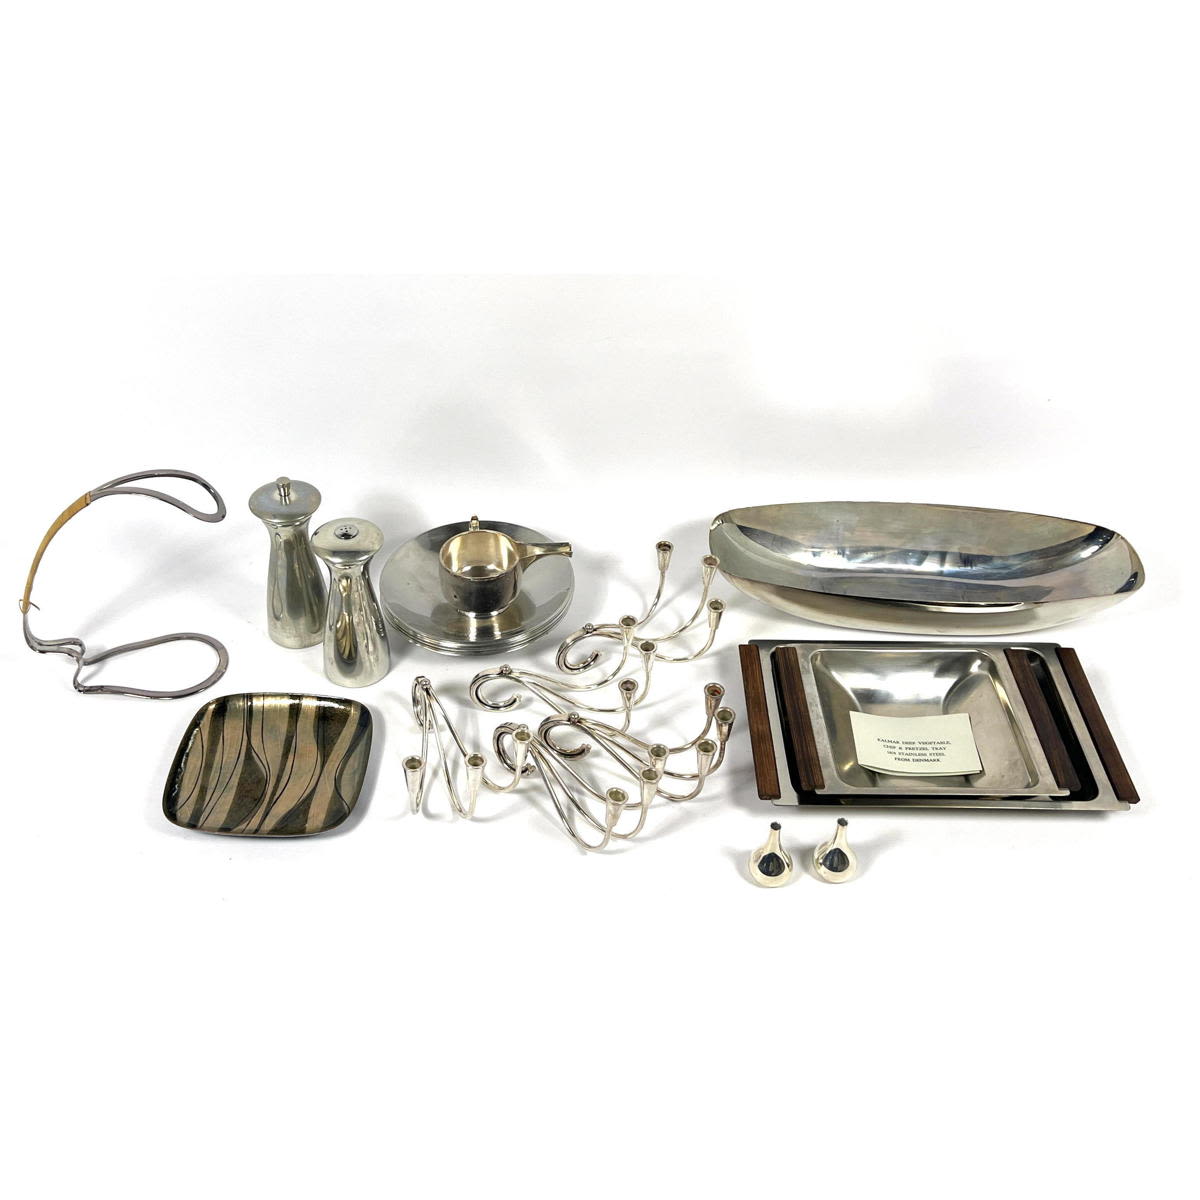 Lot of Midcentury Silver and Metalware  300407